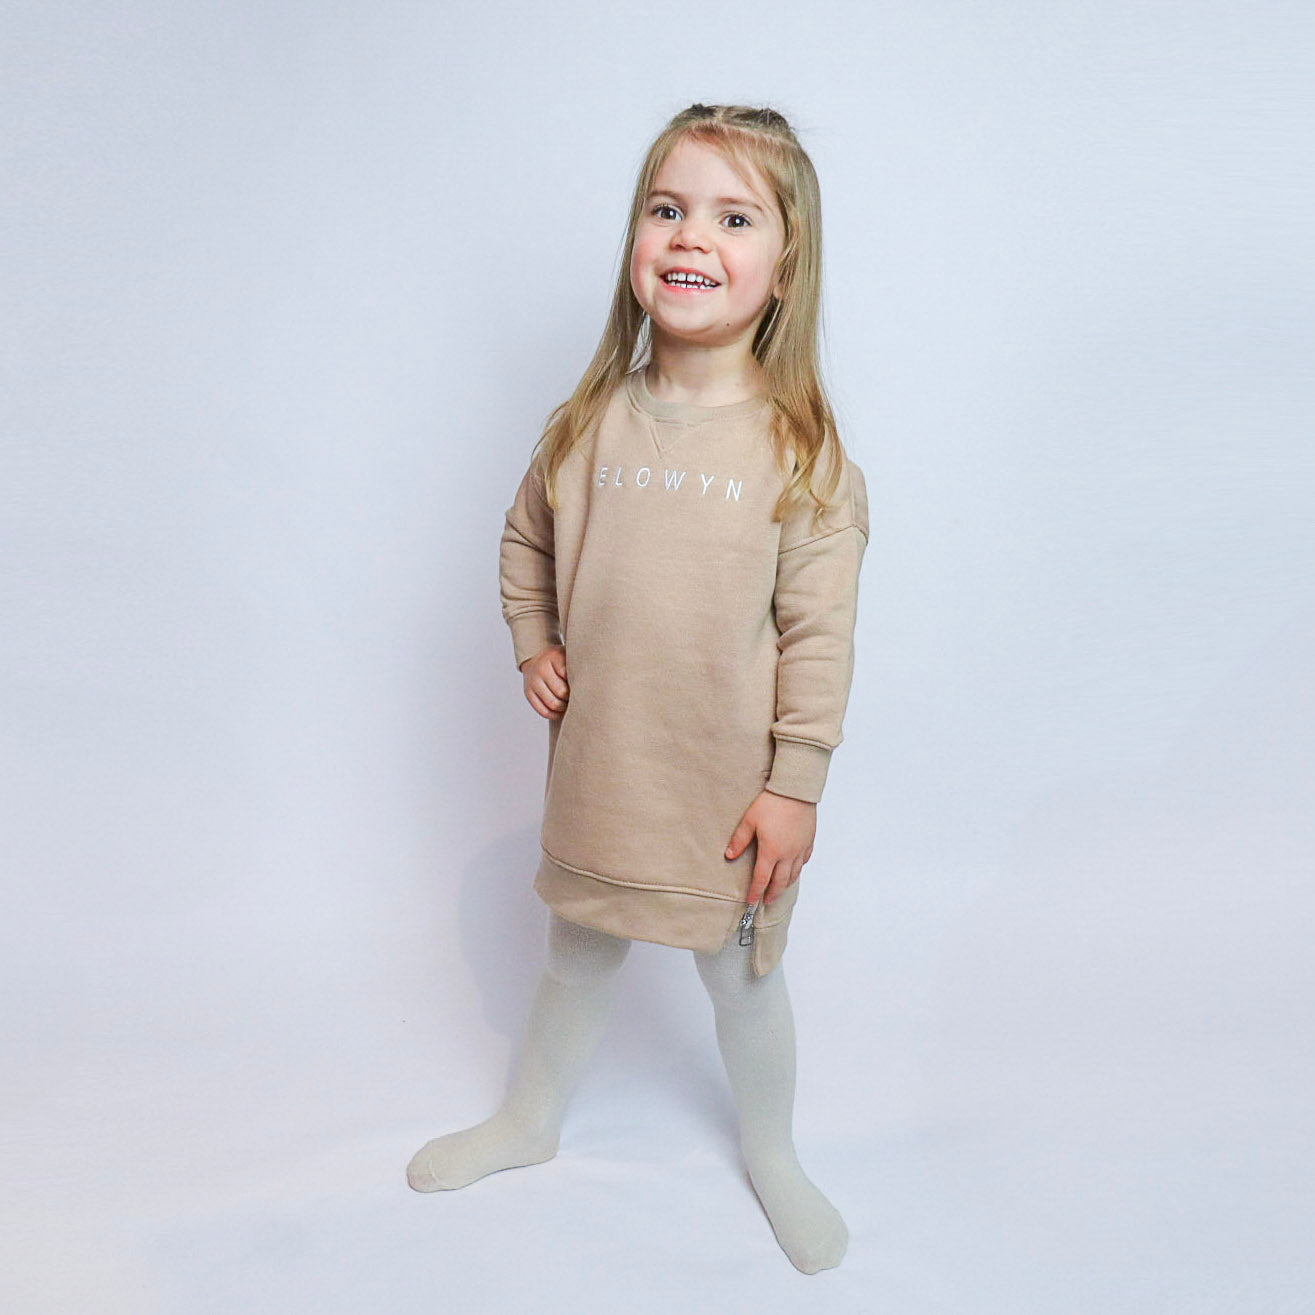 Space Block Embroidered Fleece Soft Style Sweatshirt Dress (Multiple Colours)